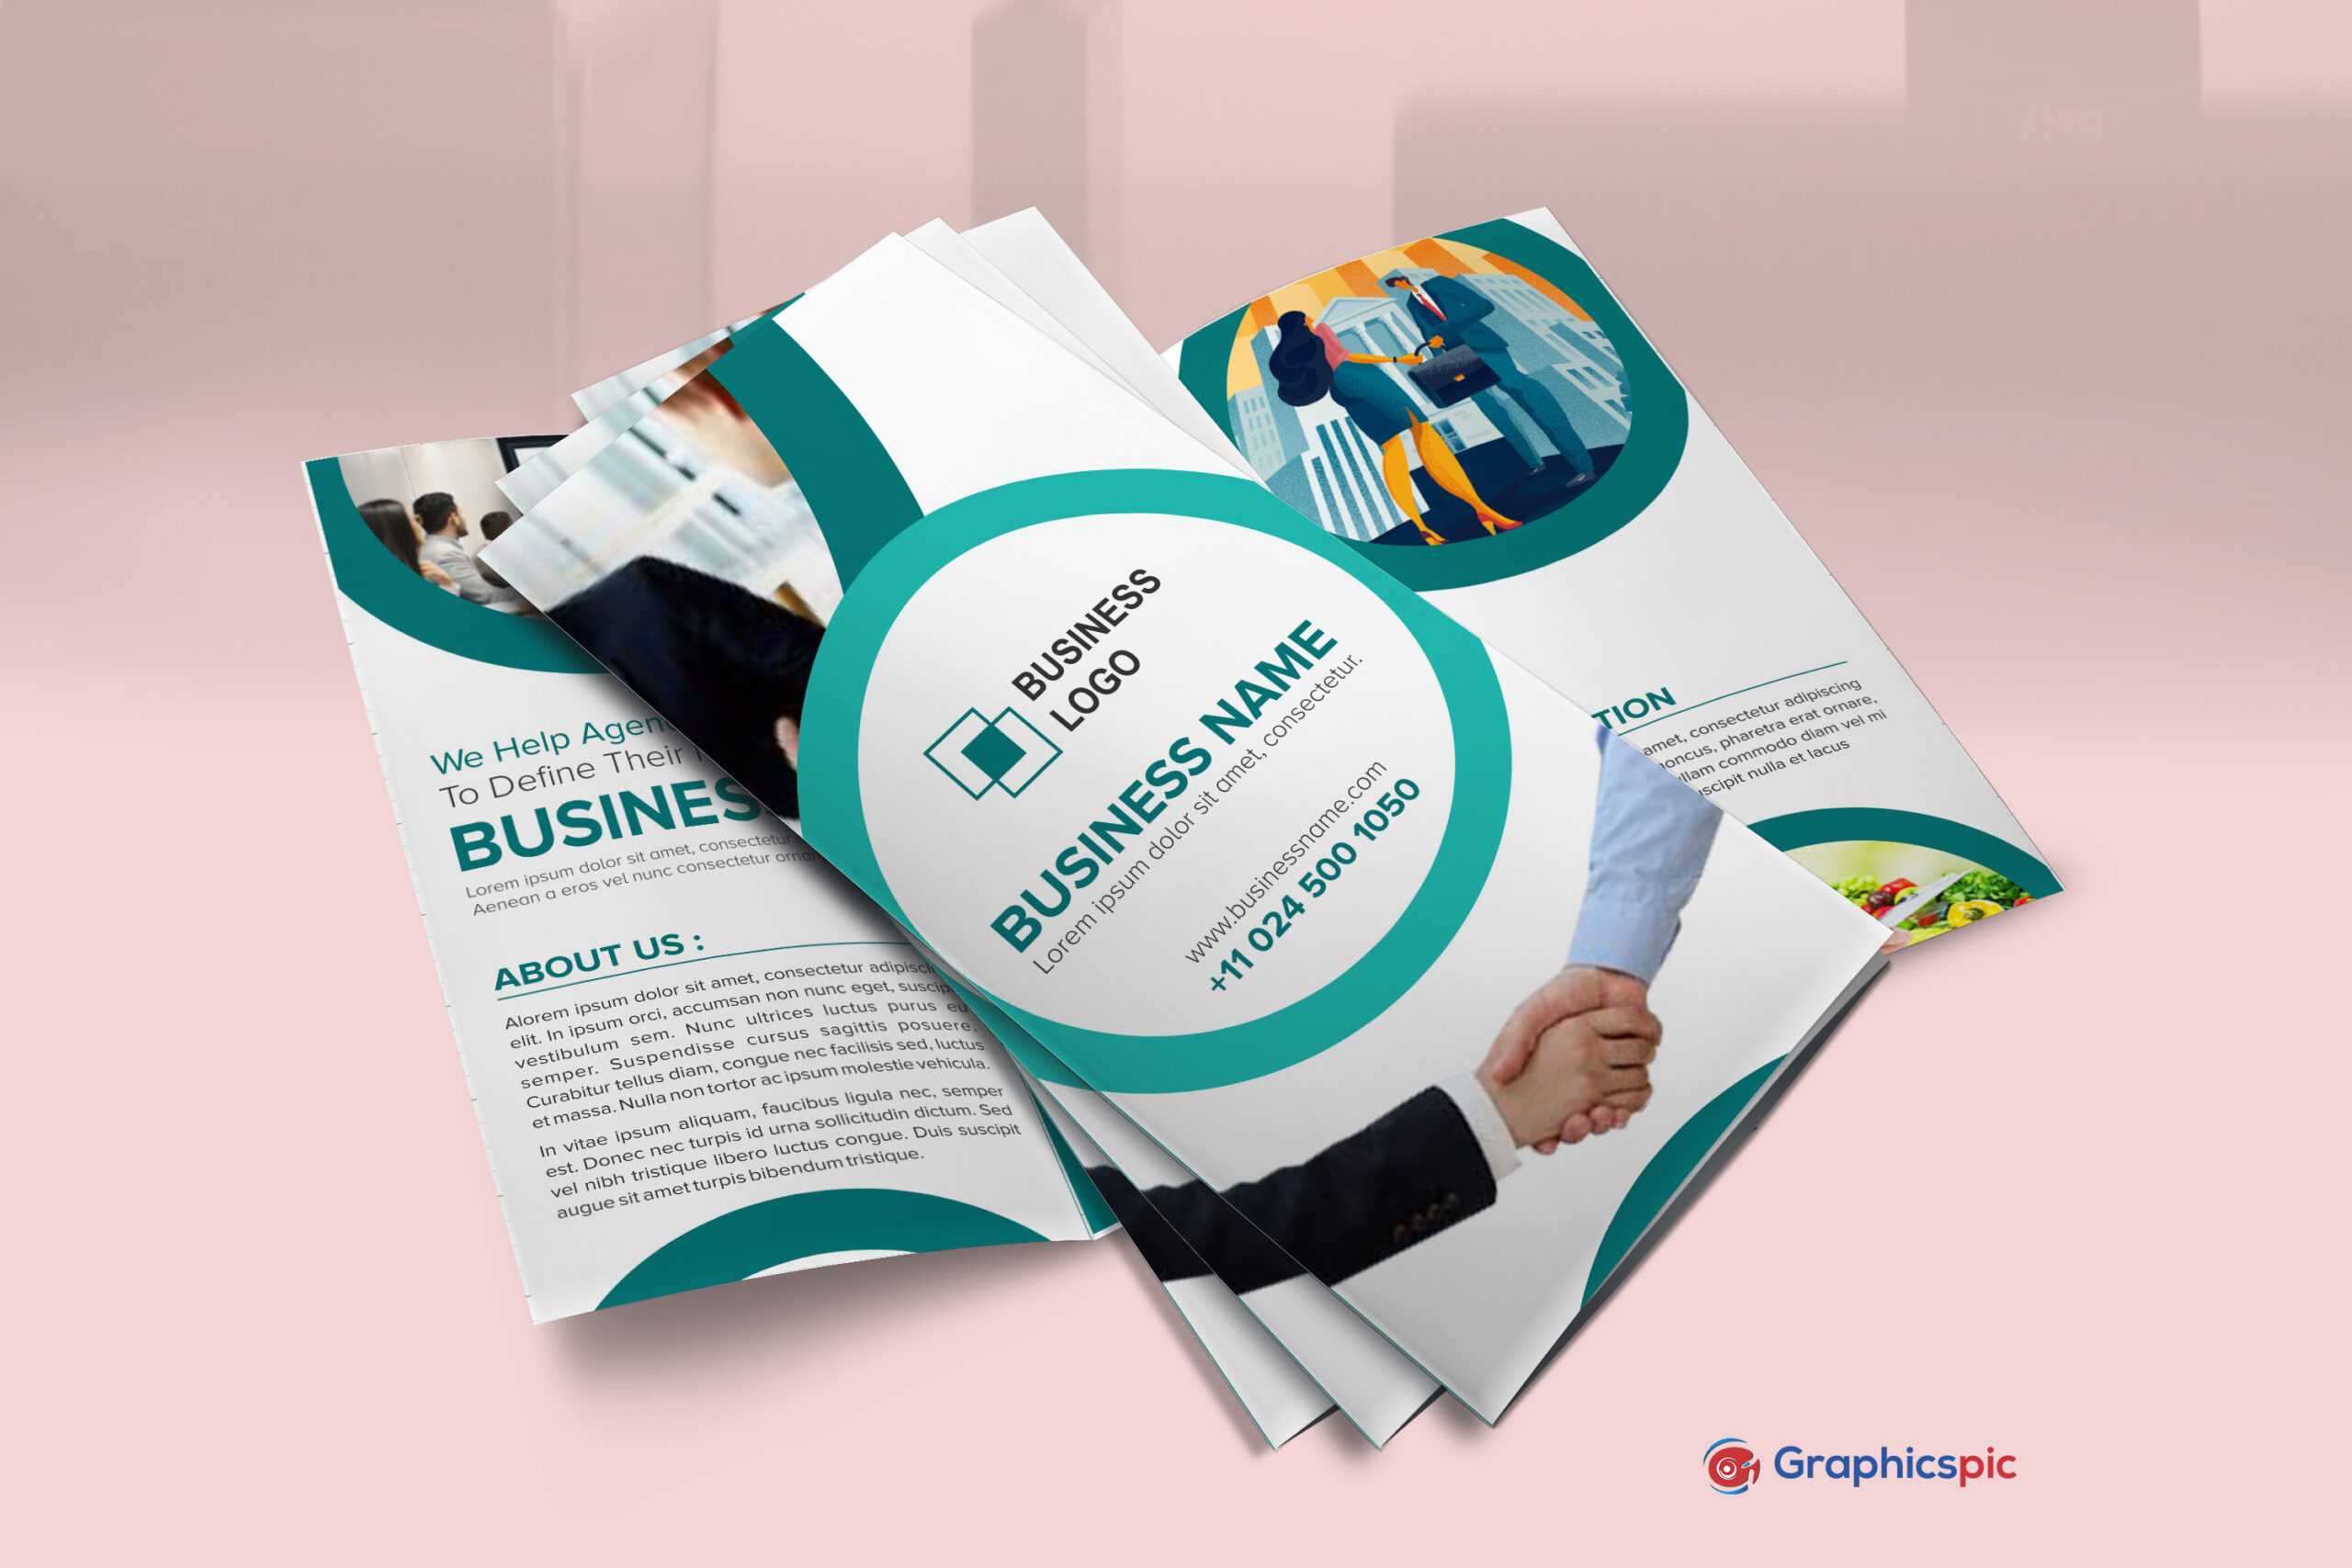 Free Download Brochure Templates Design For Events, Products Inside Product Brochure Template Free